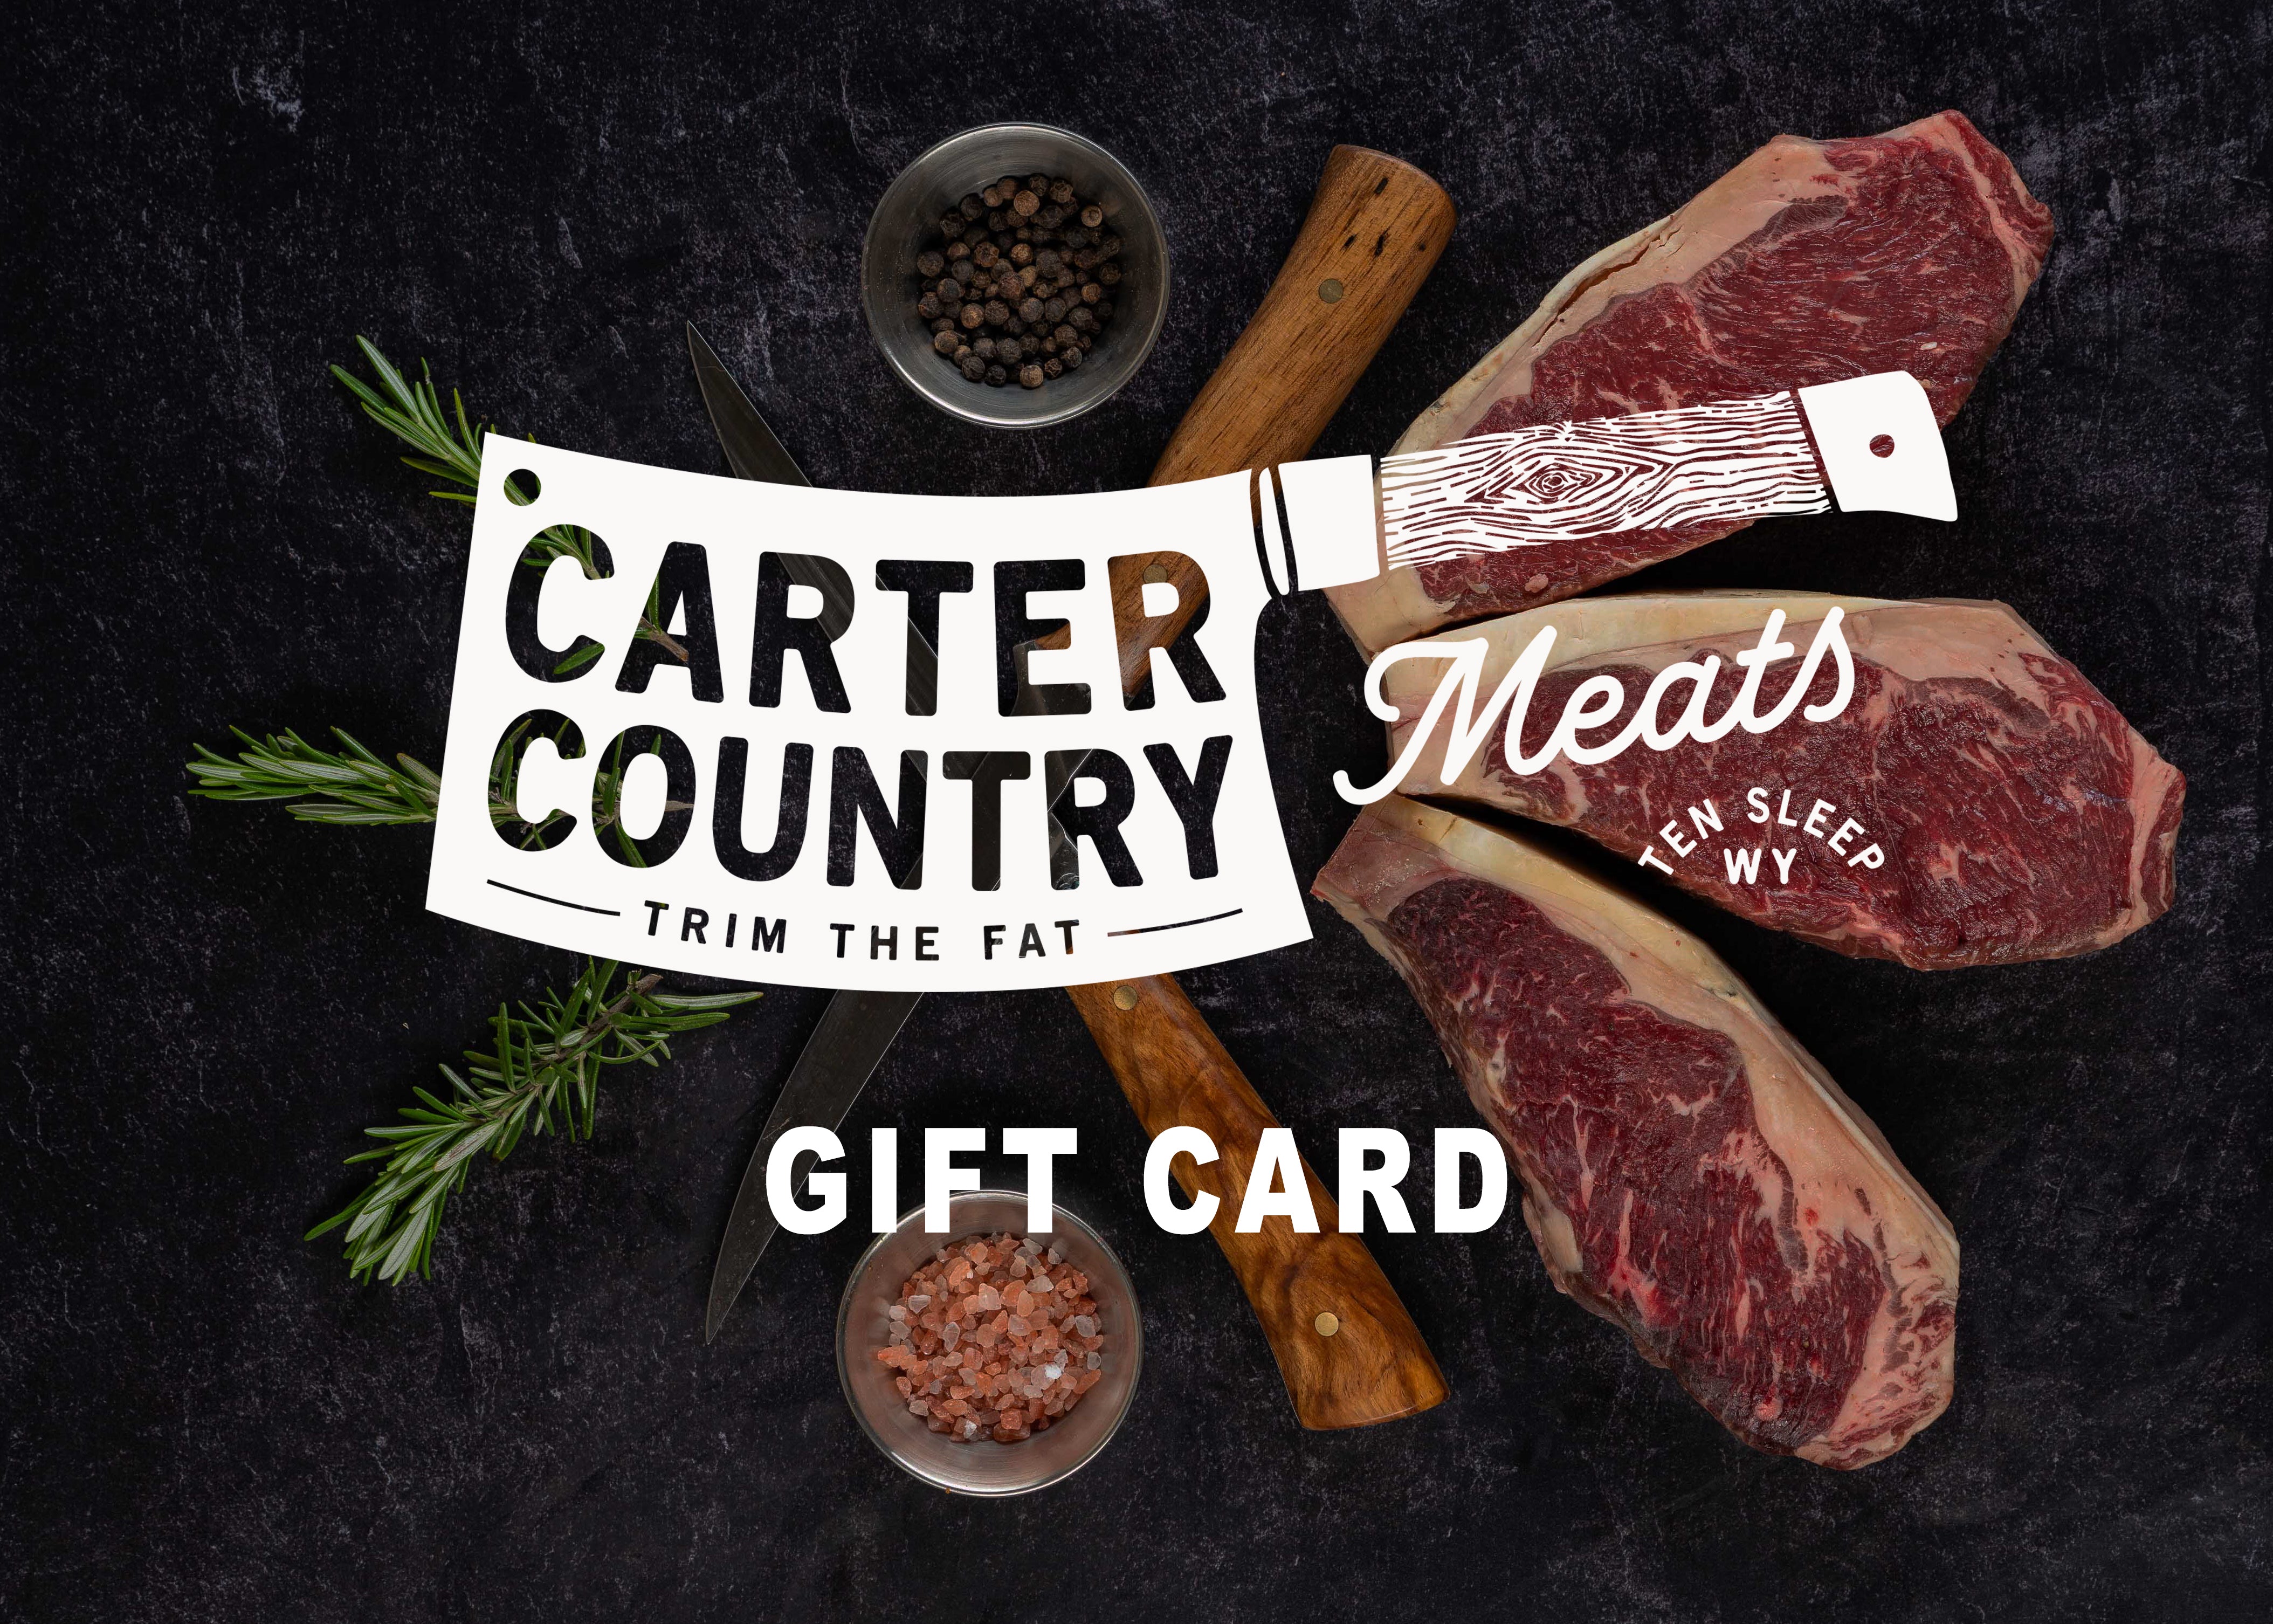 Steak cuts with knives, garnish, and seasoning. Carter Country Meats butcher knife logo. Gift Card text